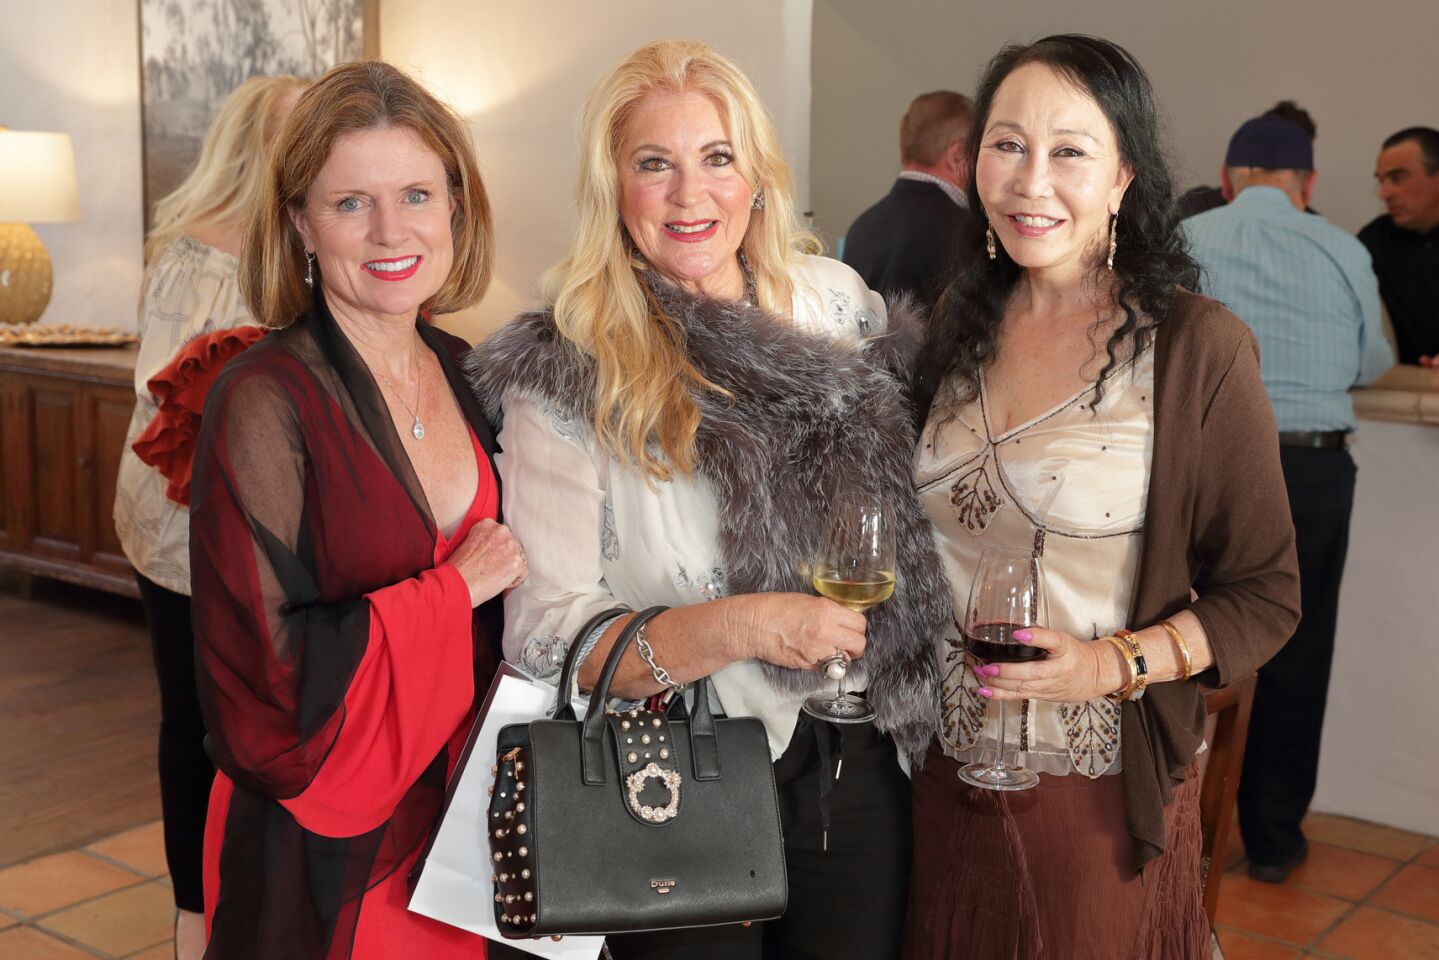 Terri-Ann Skelly, Candace Sears, Marcia Nordstrom